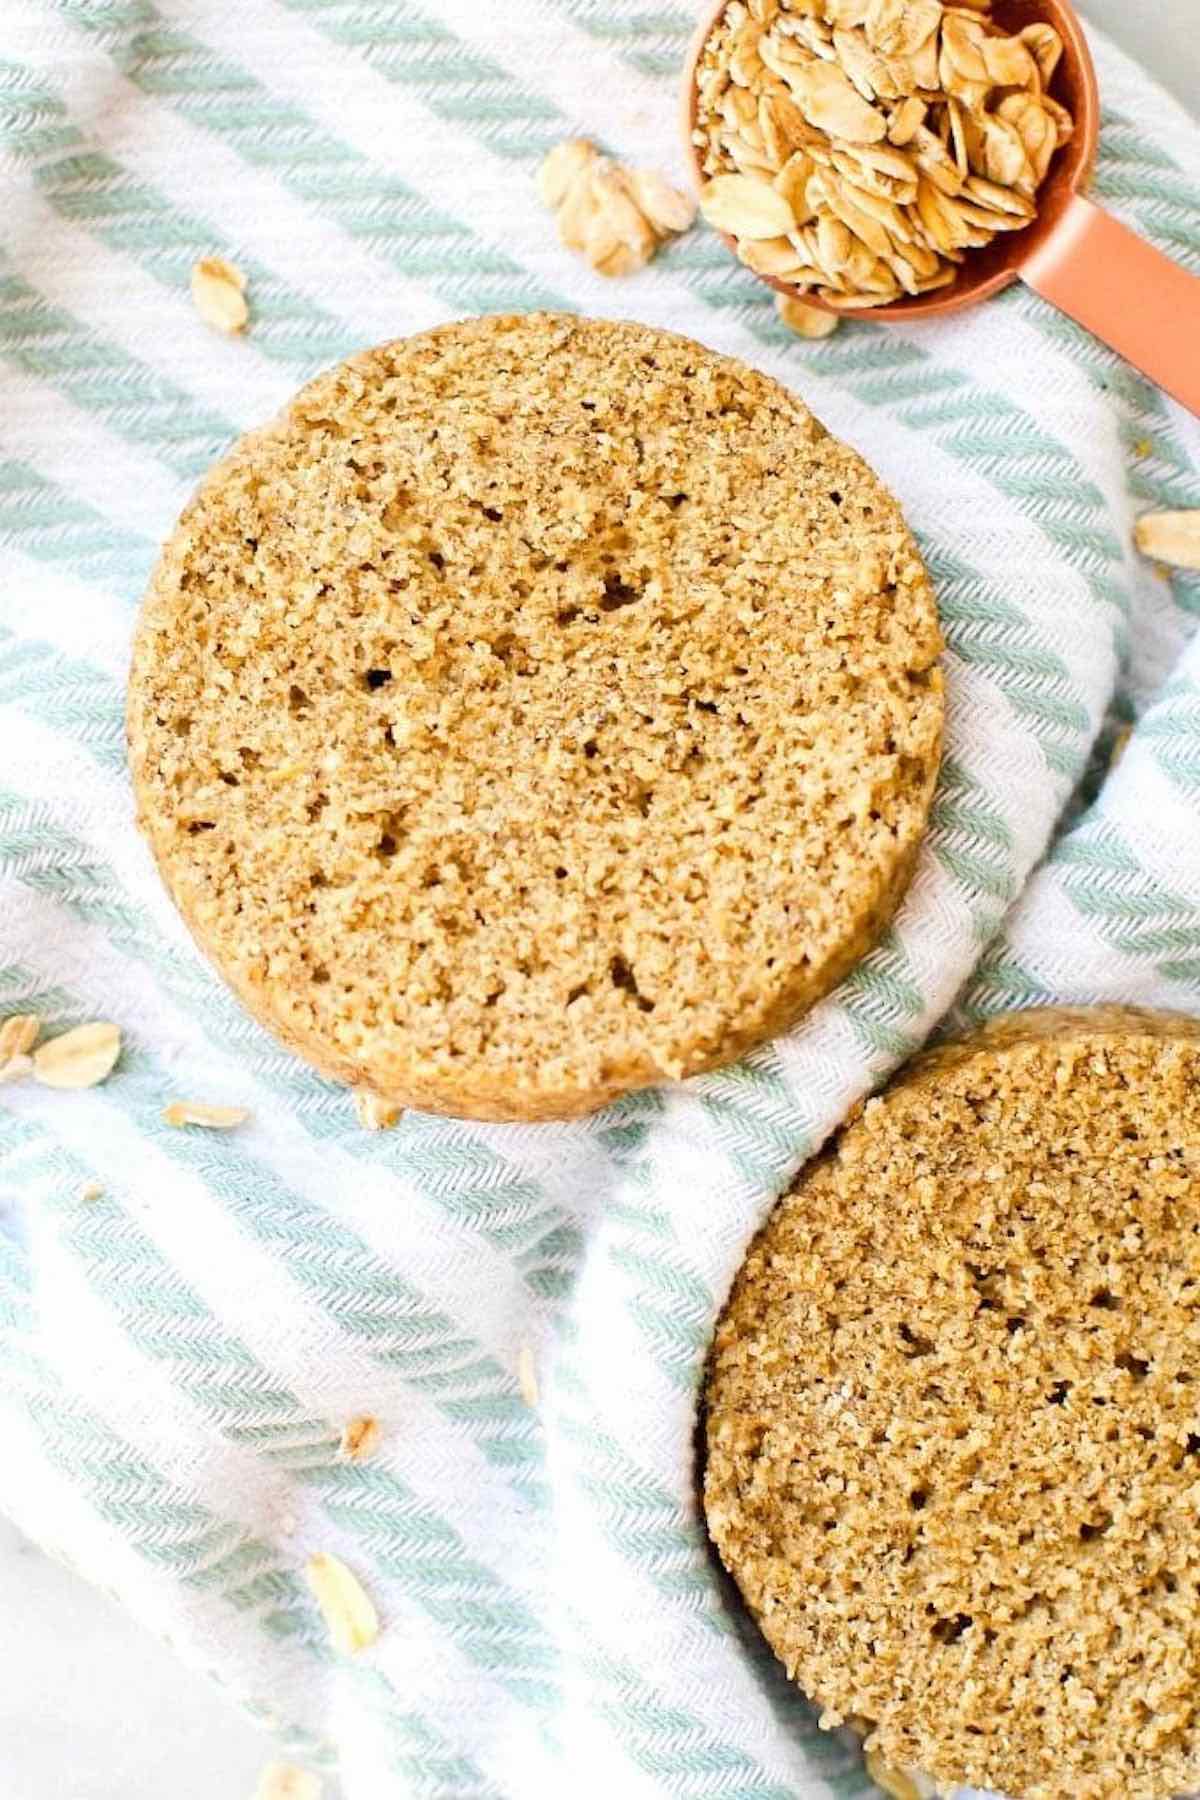 low calorie english muffins split in half untoasted.